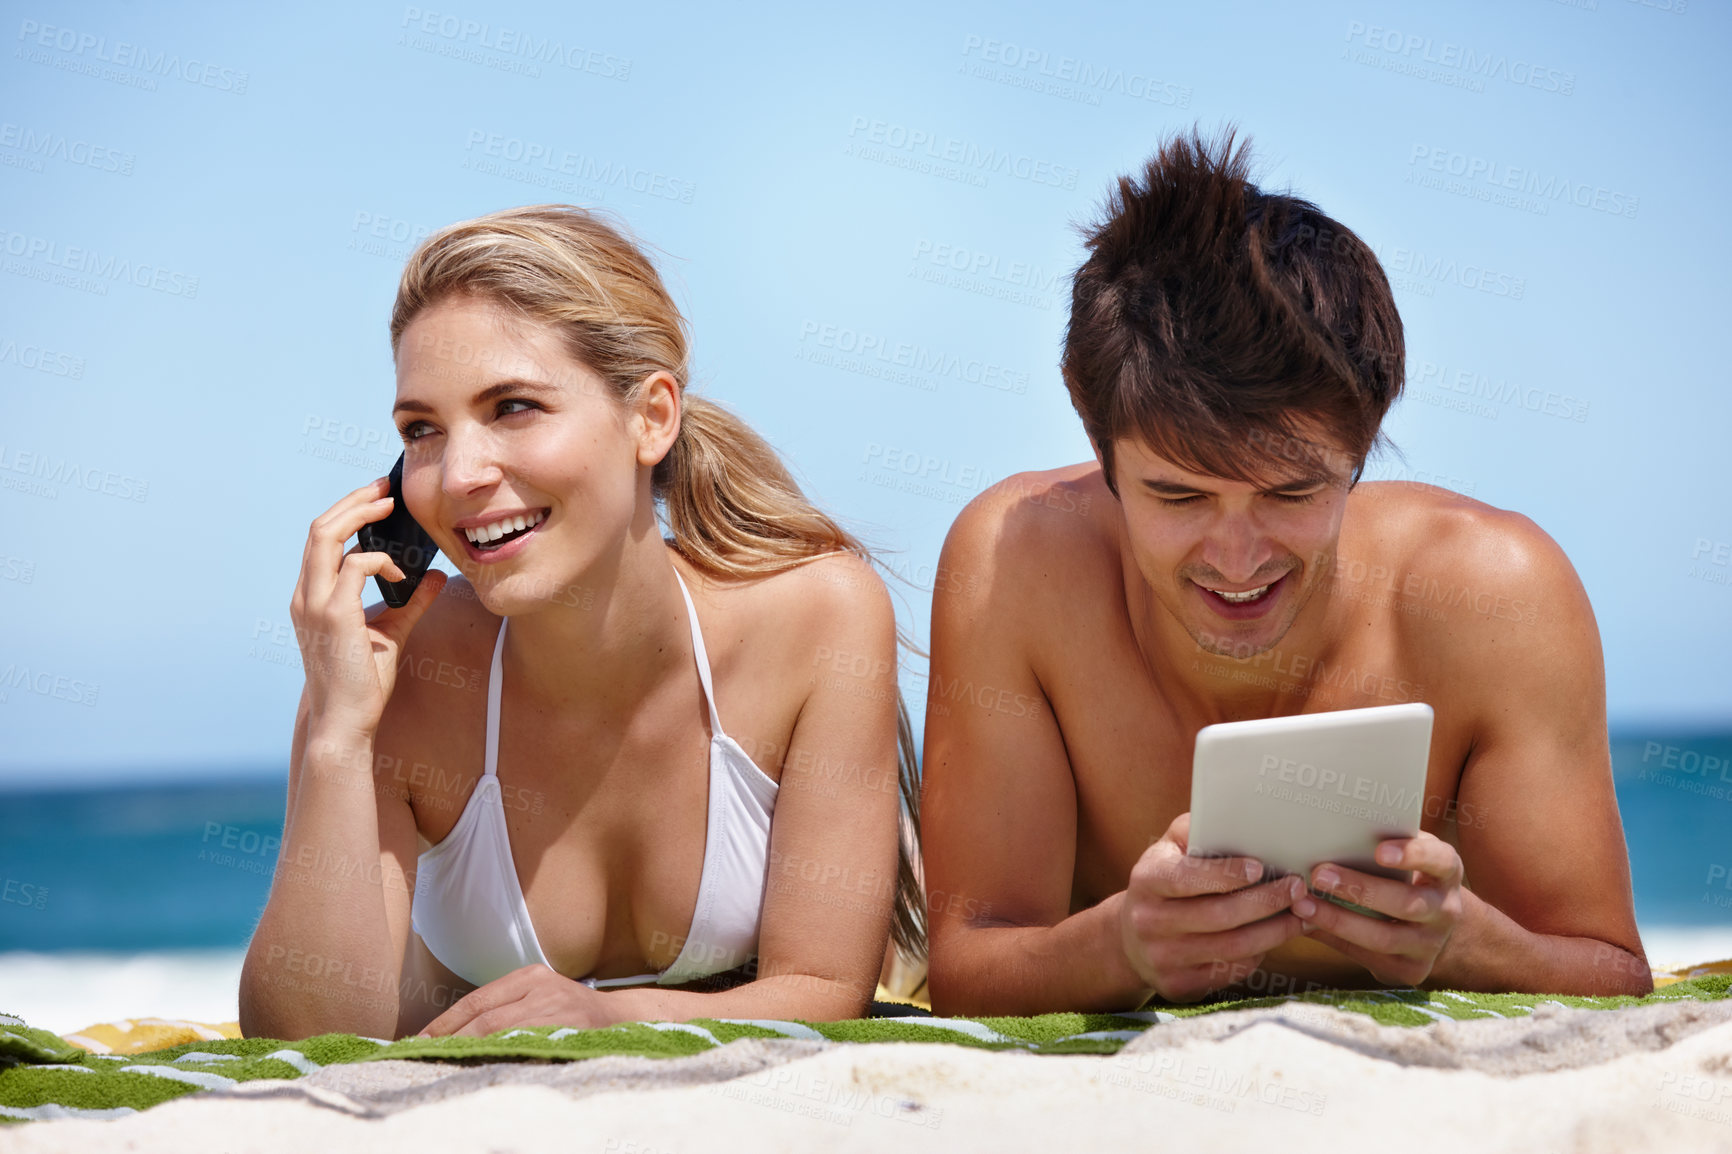 Buy stock photo Shot of a happy young couple using their tablet and cellphone at the beach